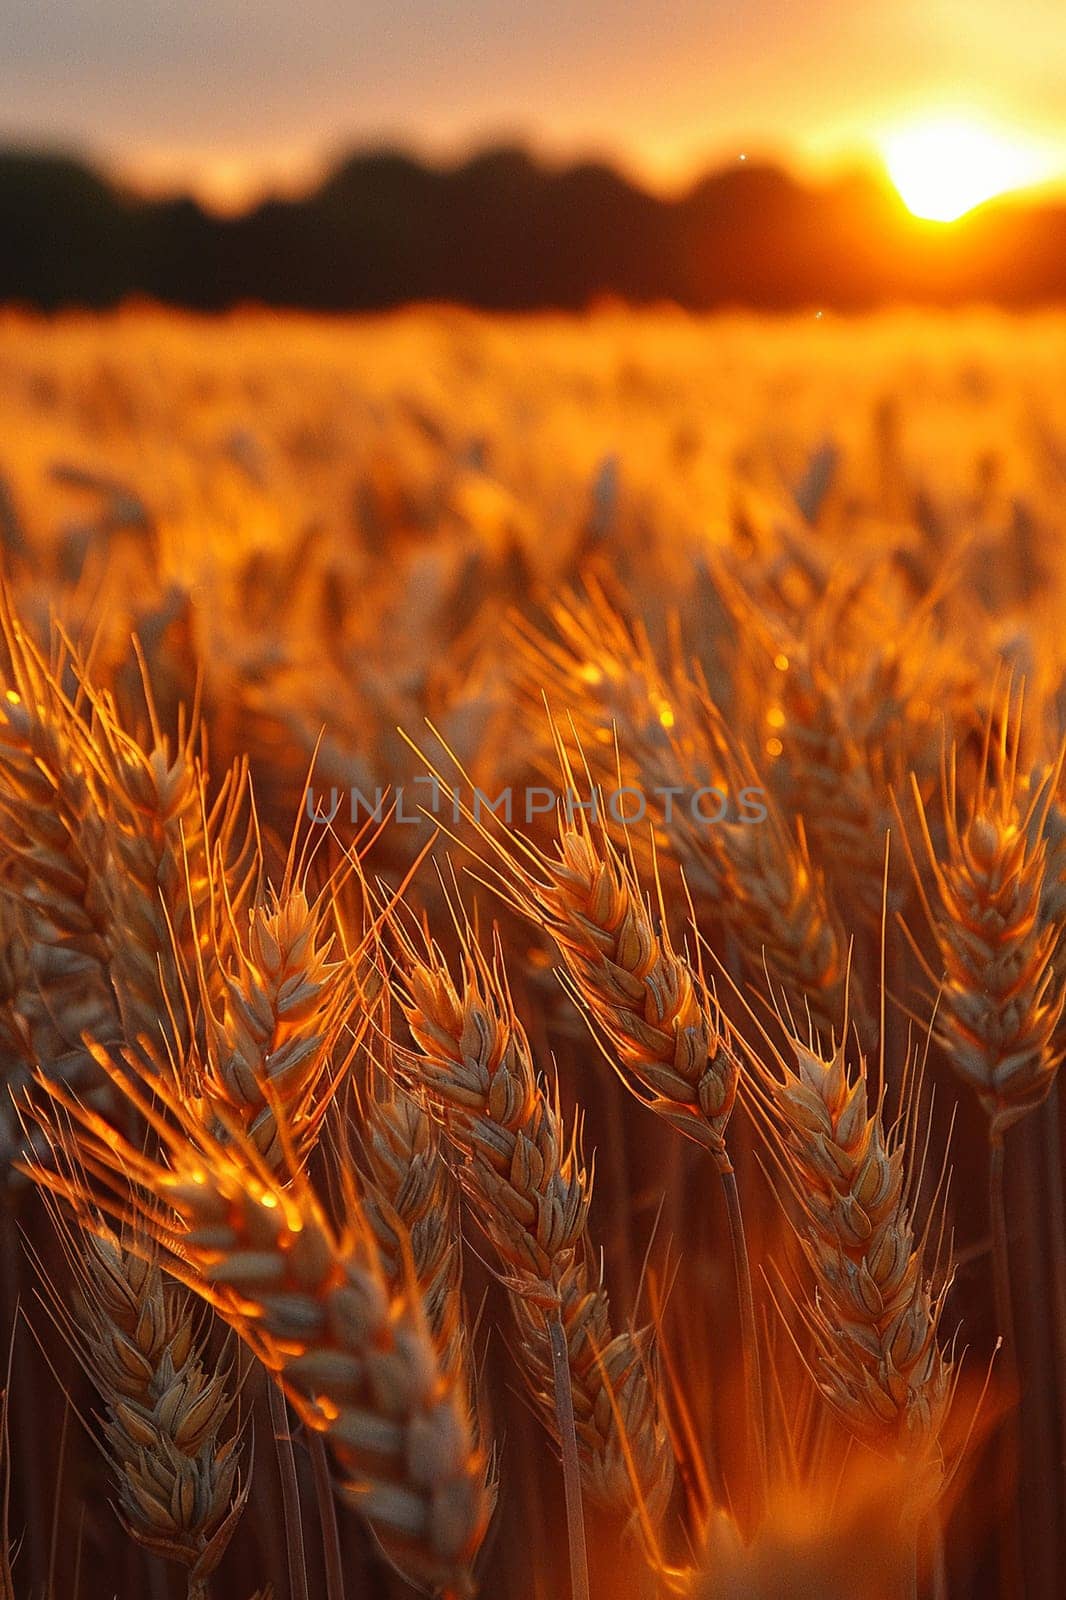 Golden Hour Over a Field of Wheat Ready for the Harvest, The light blurs with the grain, the earth basking in the day's last warmth.